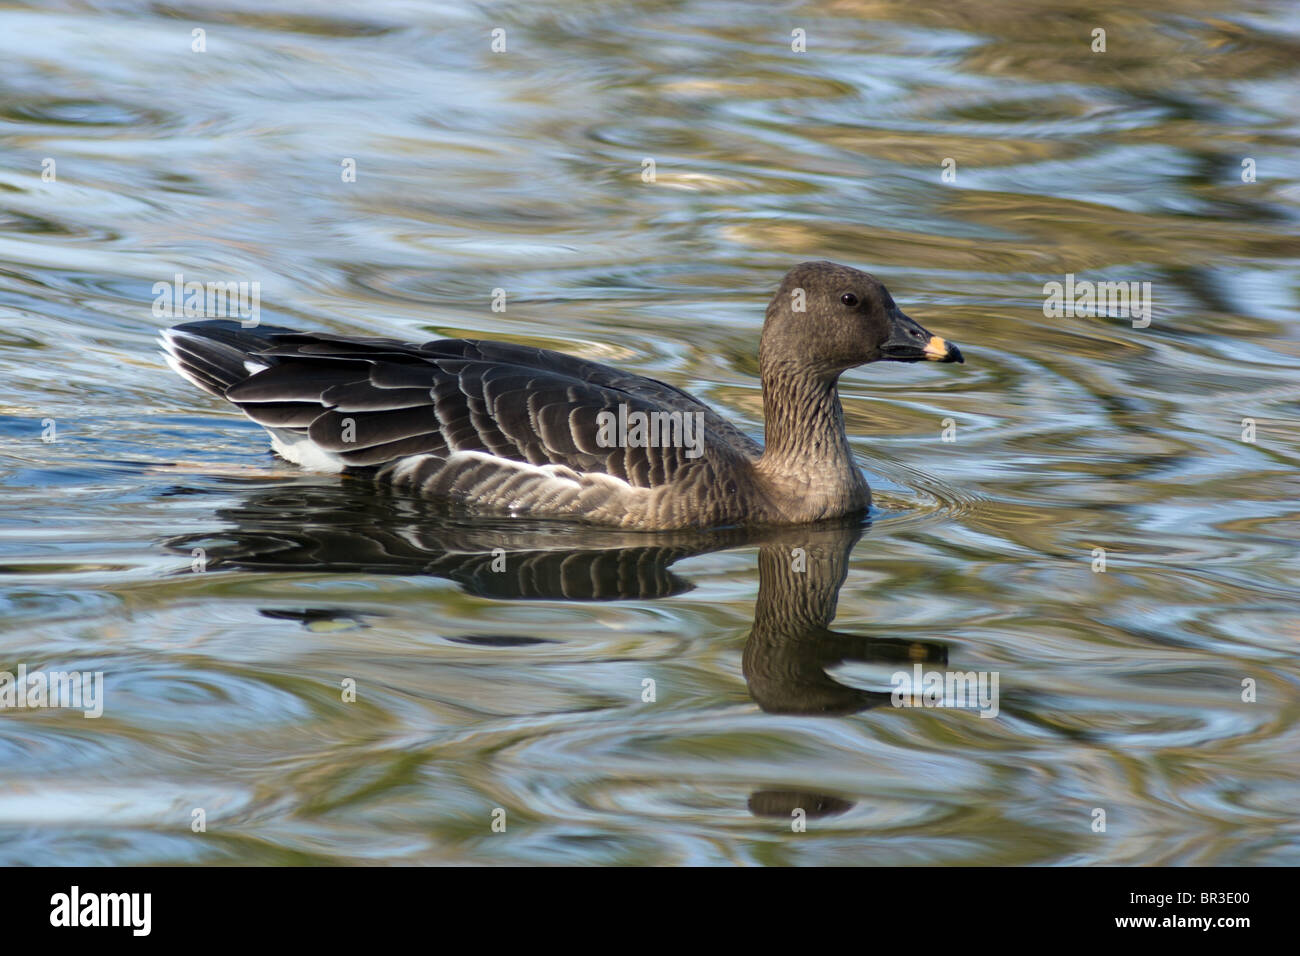 The adult Bean Goose (Anser fabalis) floats in water. Stock Photo